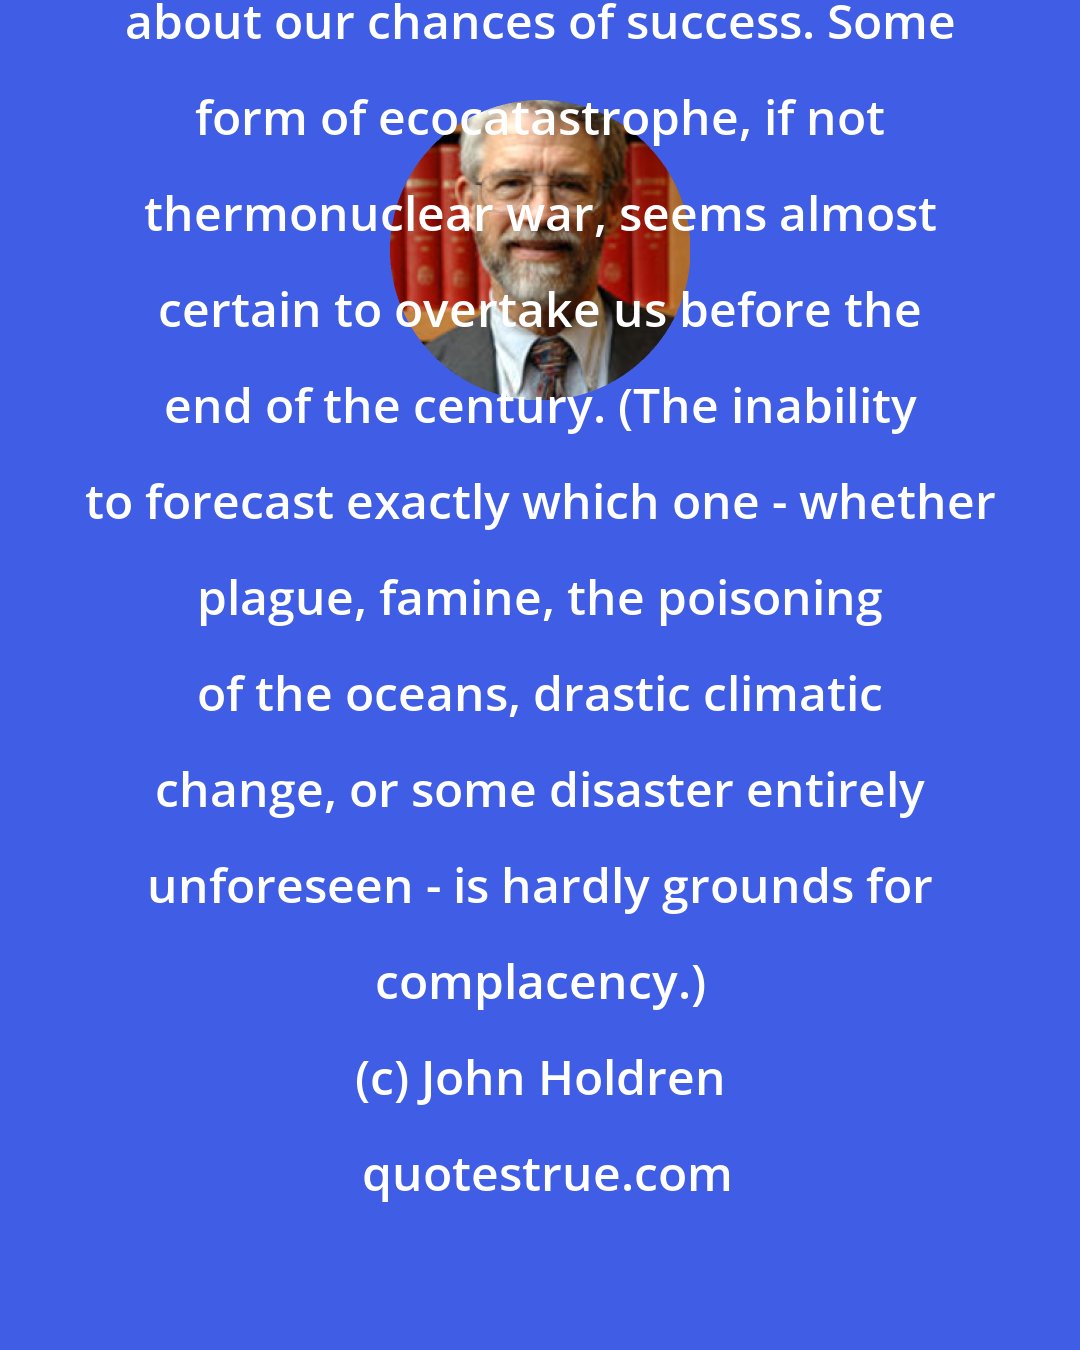 John Holdren: We are not, of course, optimistic about our chances of success. Some form of ecocatastrophe, if not thermonuclear war, seems almost certain to overtake us before the end of the century. (The inability to forecast exactly which one - whether plague, famine, the poisoning of the oceans, drastic climatic change, or some disaster entirely unforeseen - is hardly grounds for complacency.)